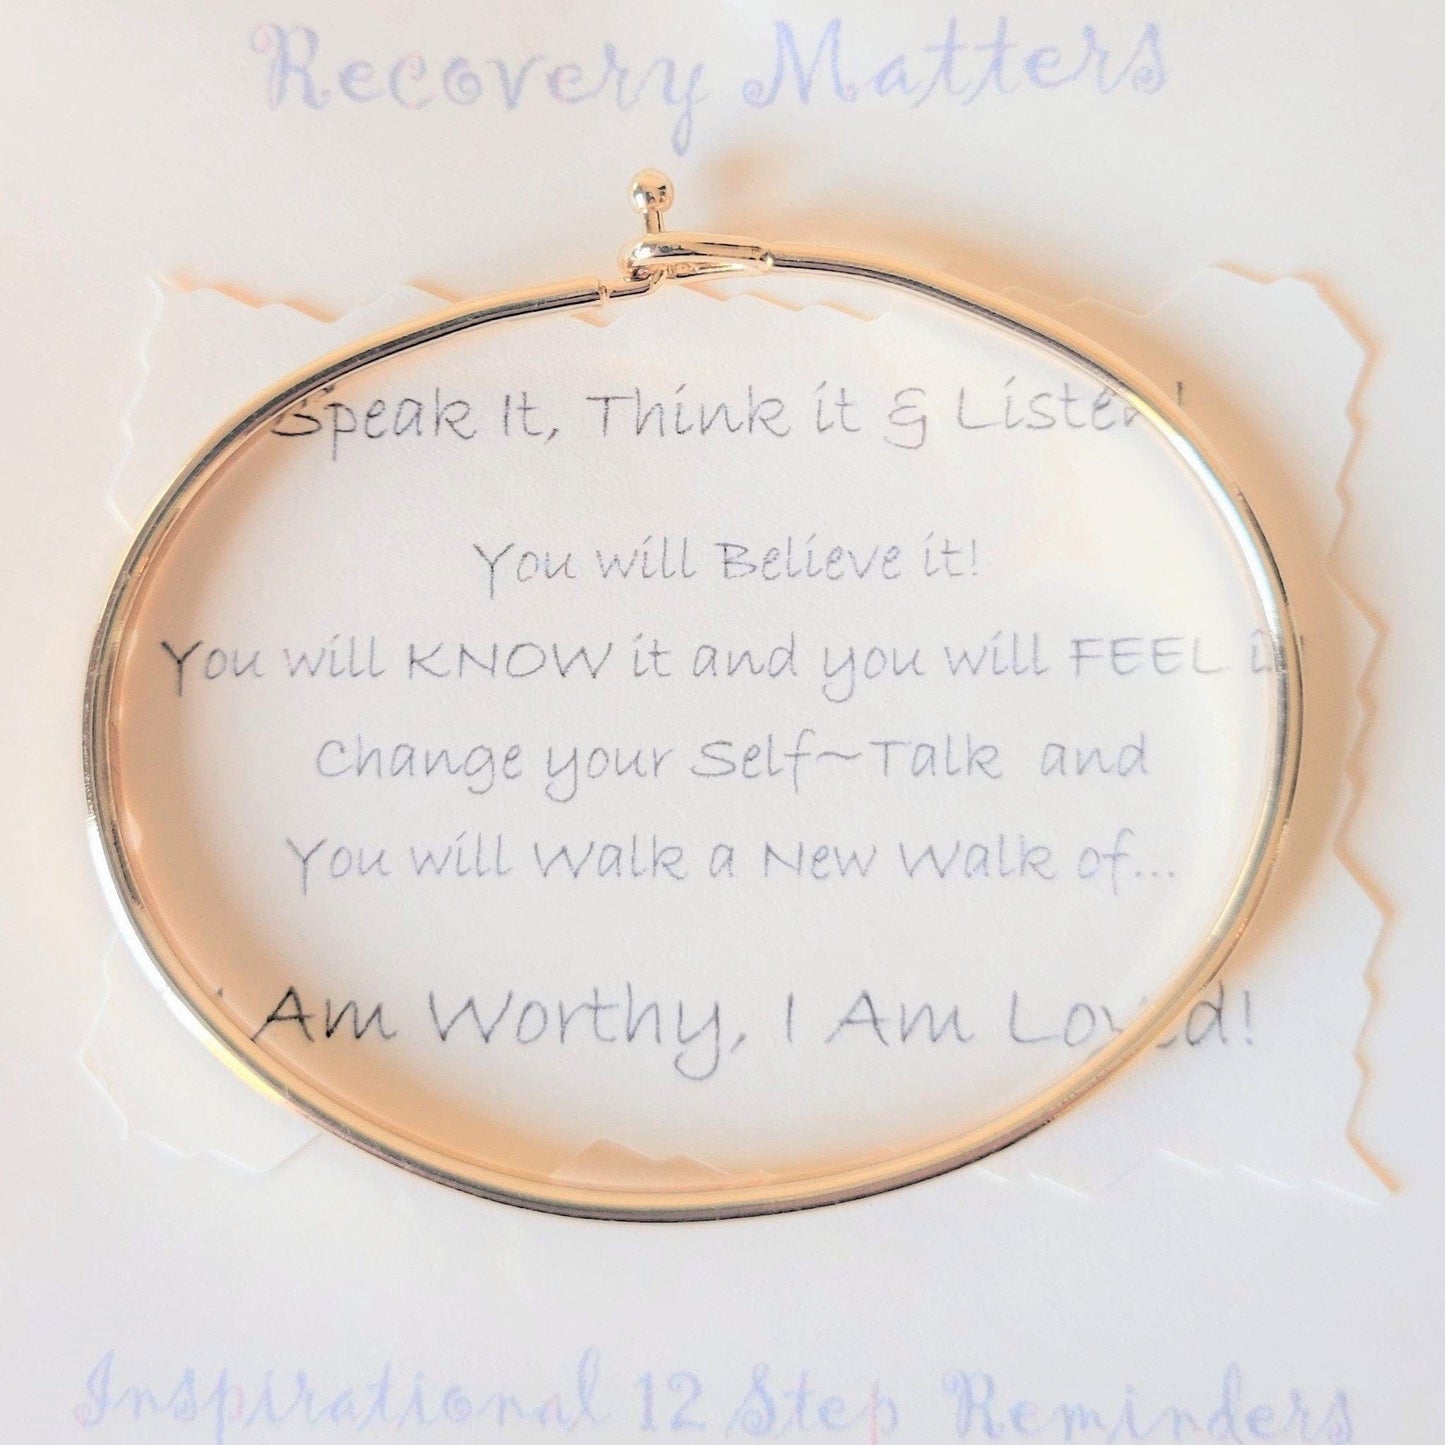 "I Am Worthy, I Am Loved" Bracelet By Recovery Matters